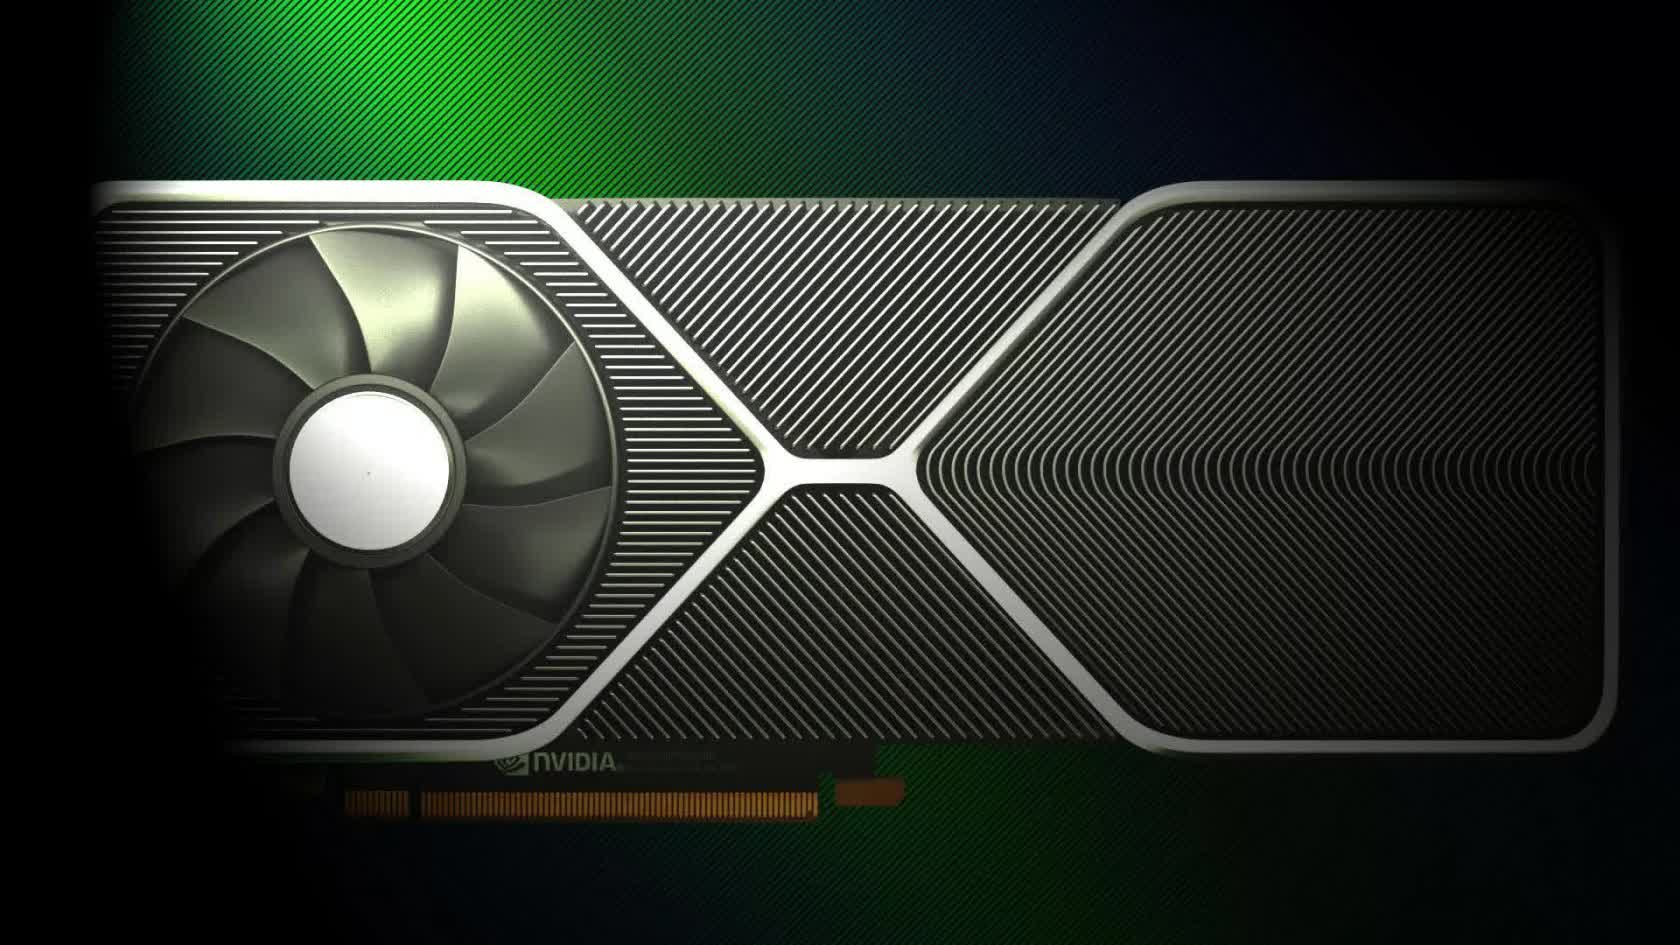 NVIDIA Delivers Greatest-Ever Generational Leap with RTX 30 Series GPUs